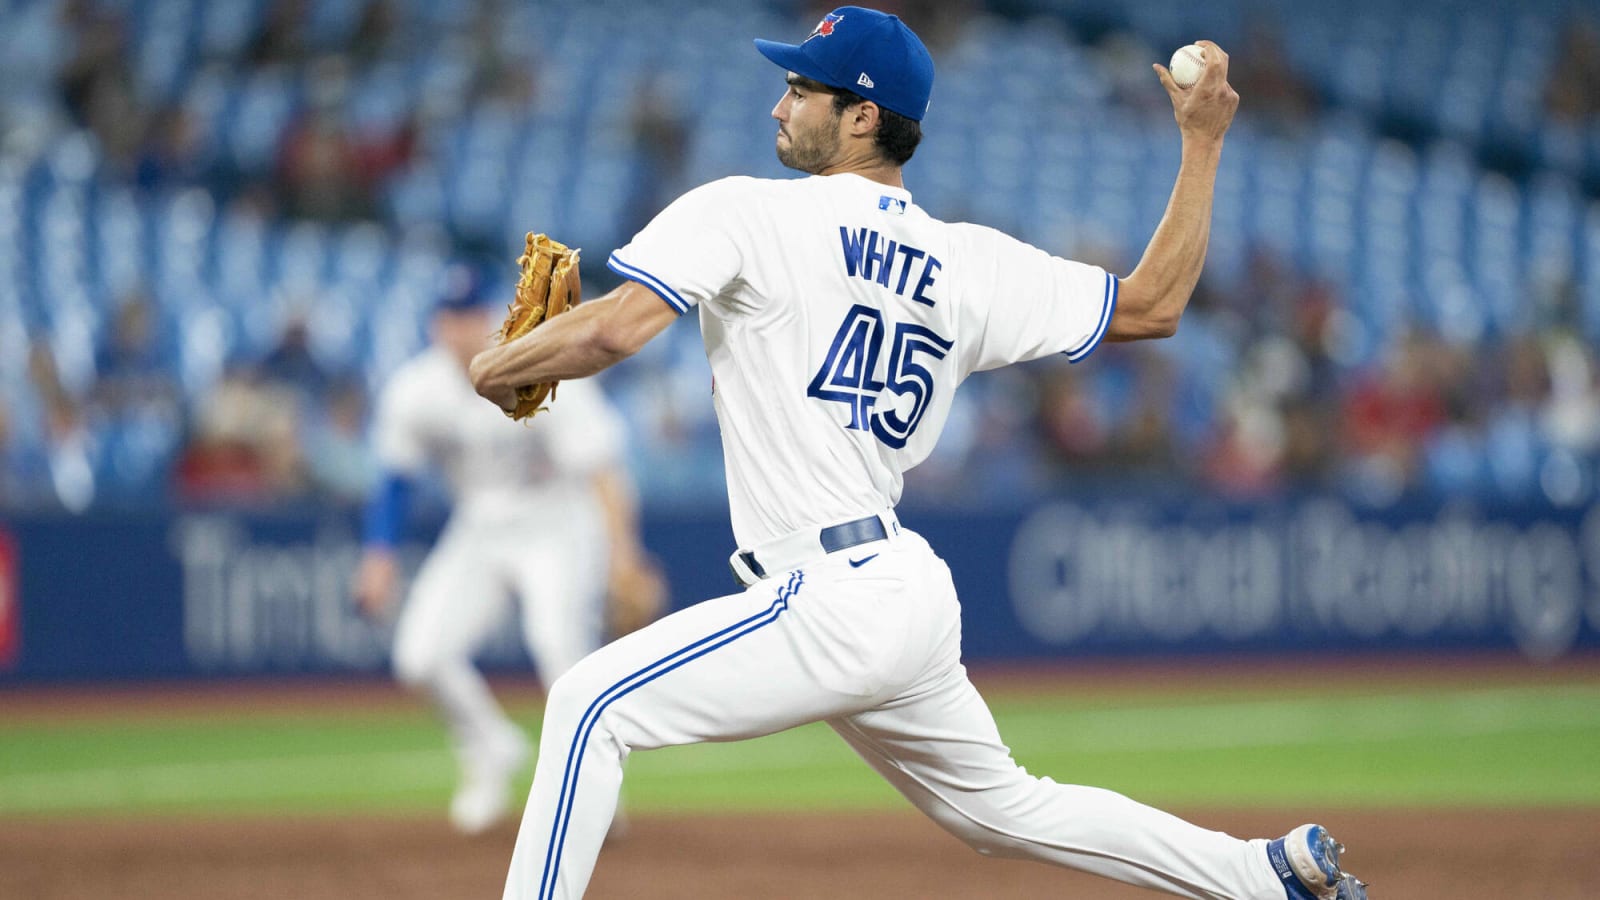 Mitch White hurled a gem, Isiah Kiner-Falefa hit his first home run as a Blue Jay, and more!